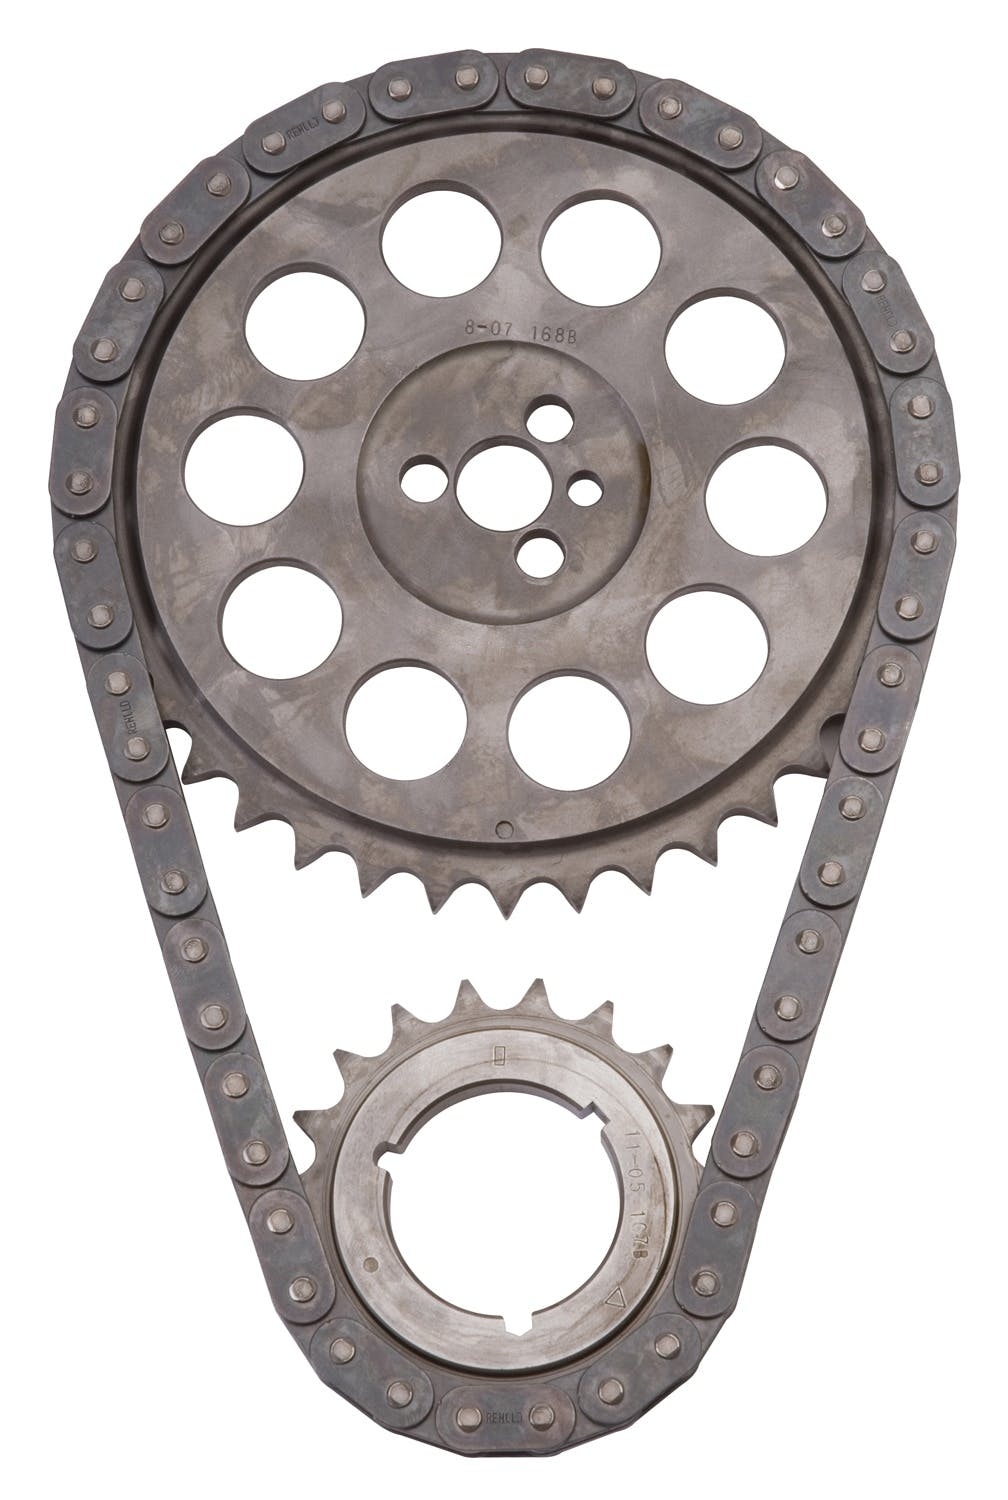 Edelbrock 7816 TIMING CHAIN PERF LINK 396-502 CHEVY 96-LATER GEN VI BLOCKS W/CAM THRUST PLATE